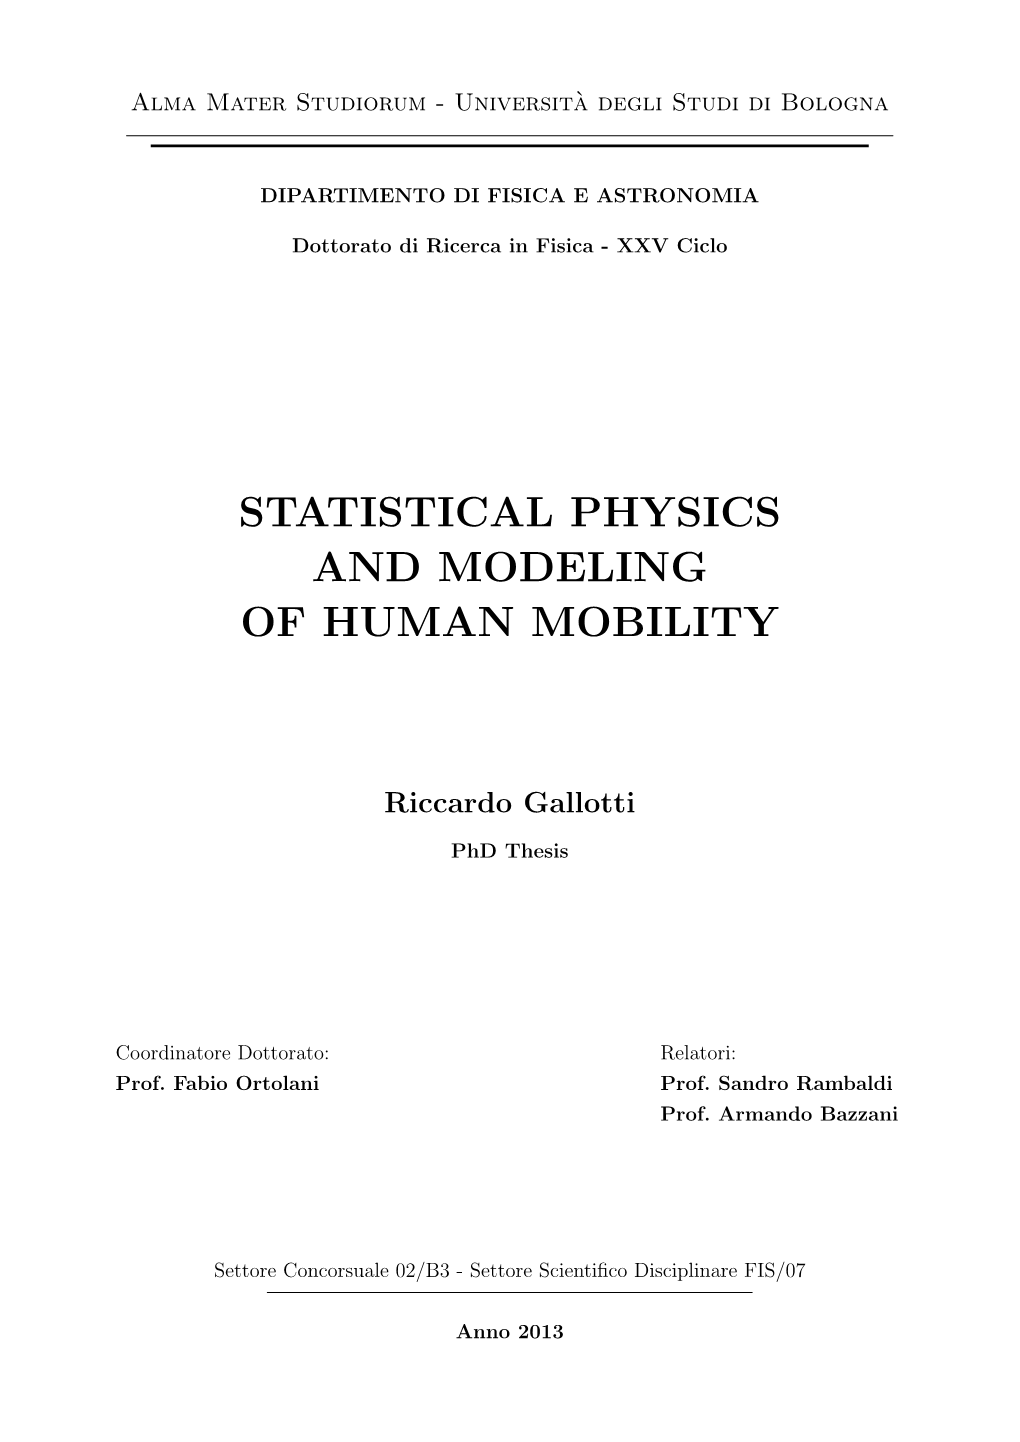 Statistical Physics and Modeling of Human Mobility